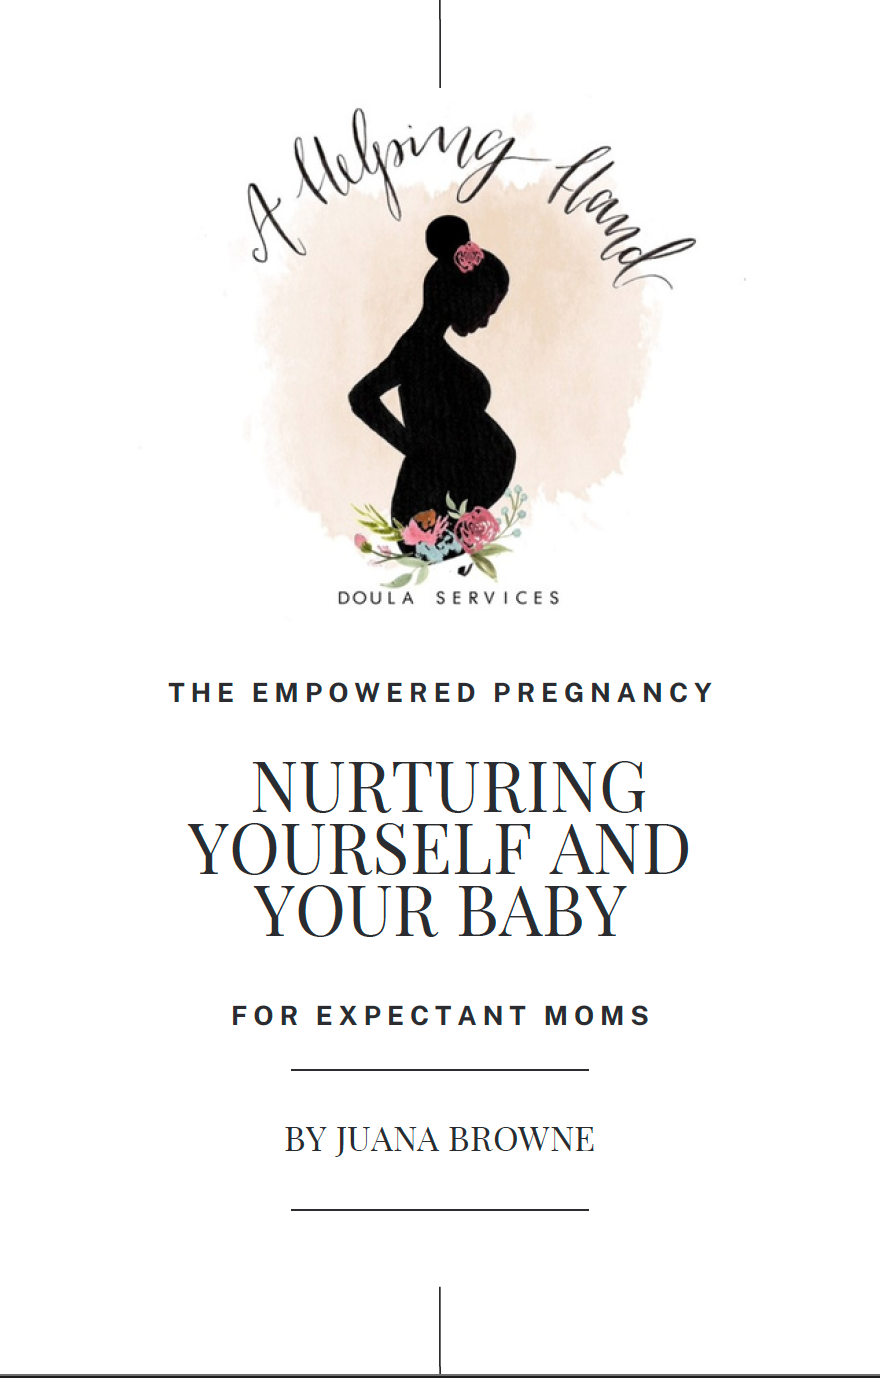 The Empowered Pregnancy